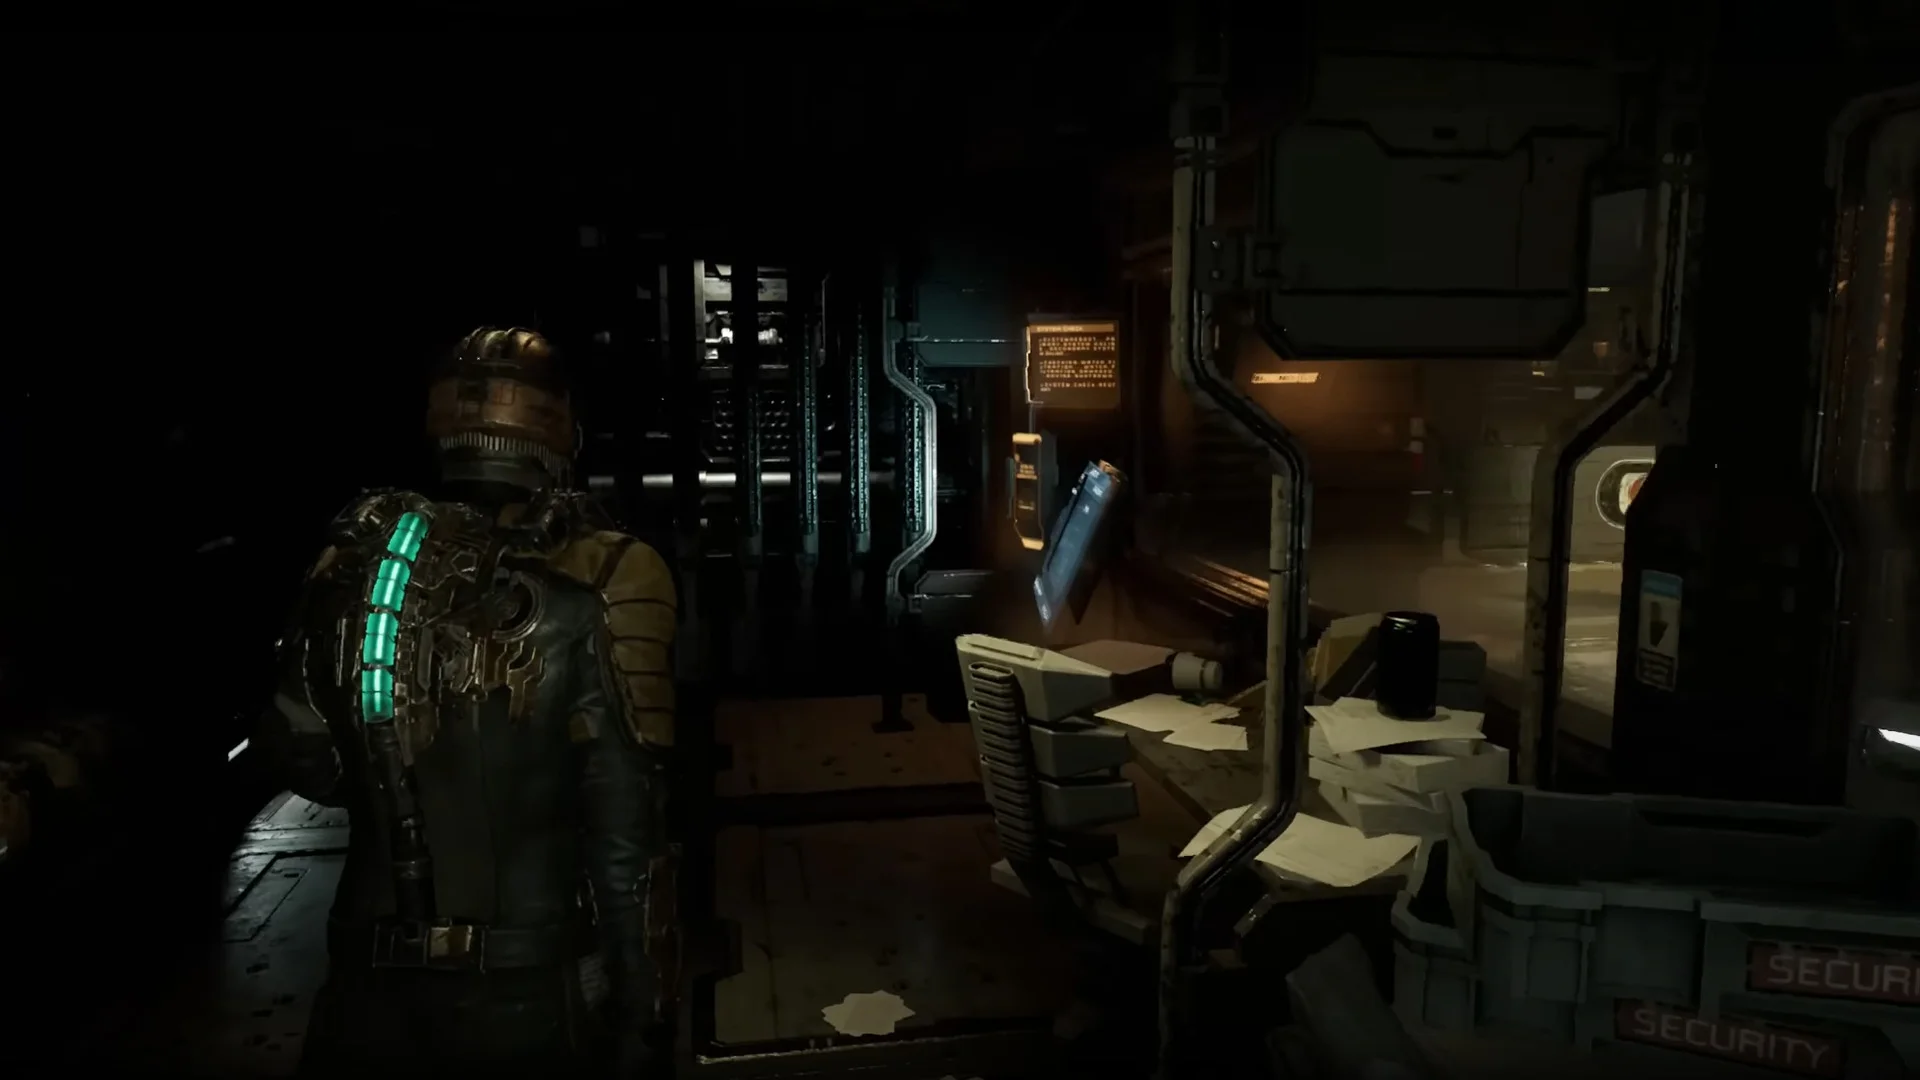 Dead Space remake is co-designed by “diehard fans” working with EA